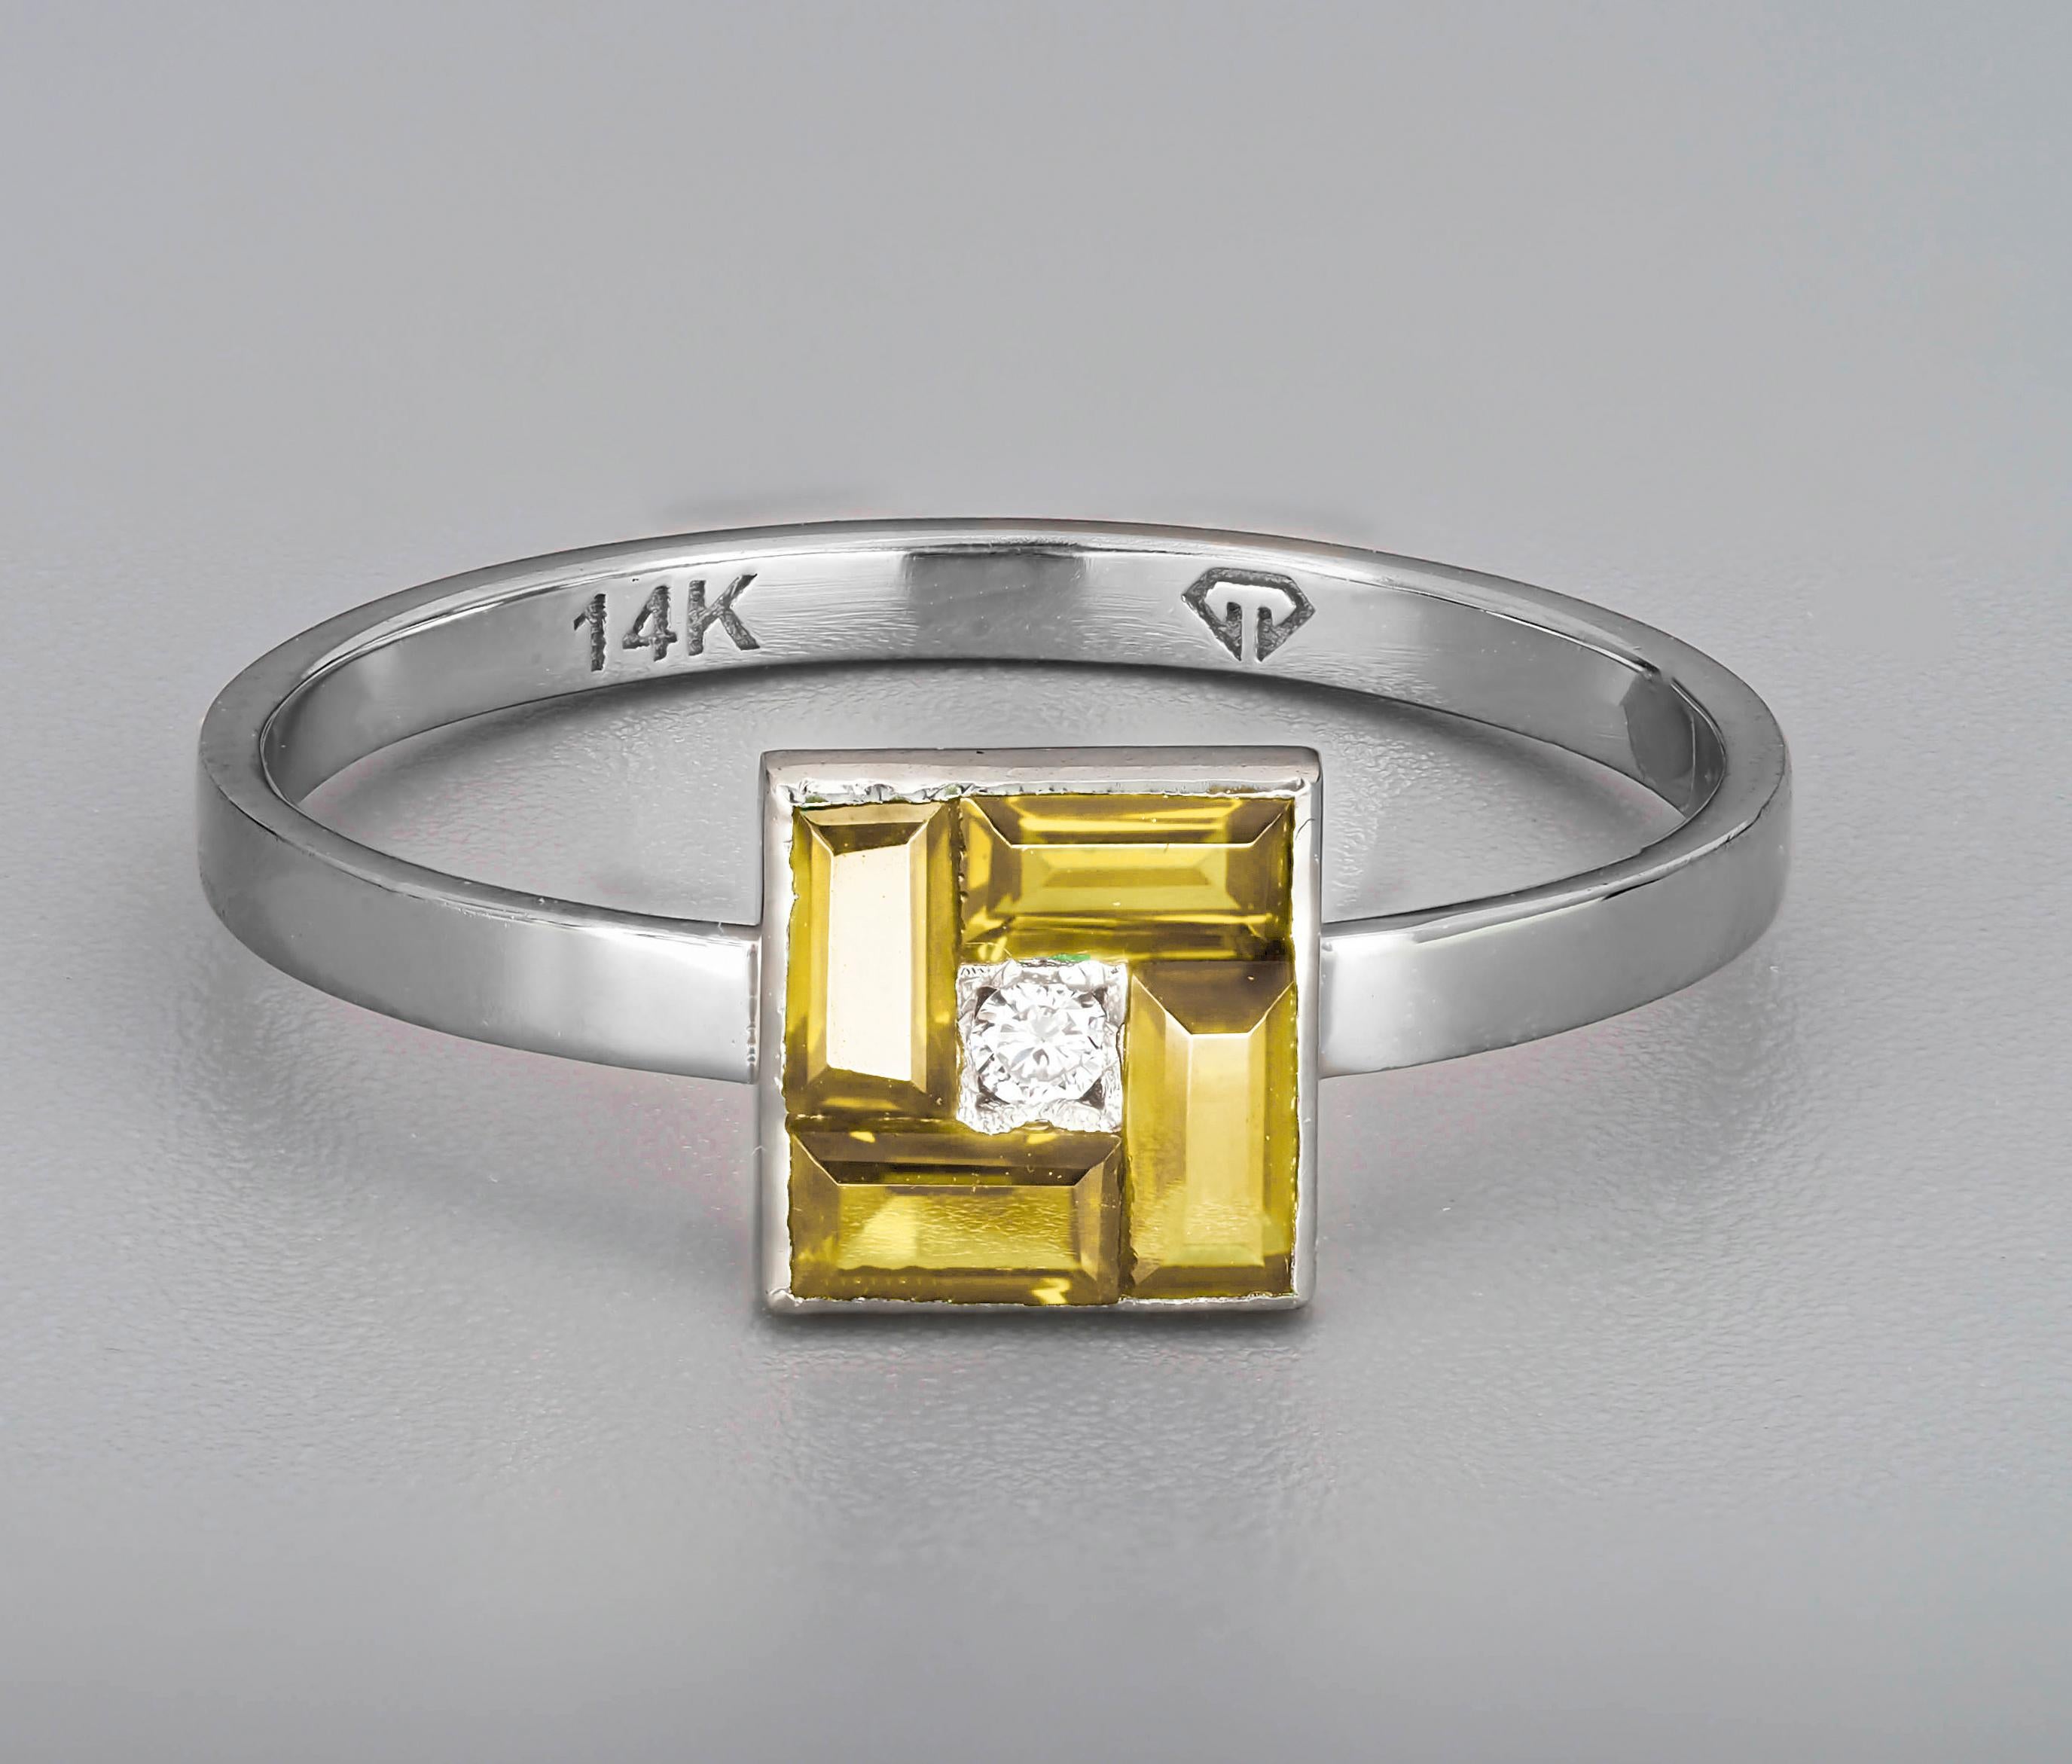 Yellow baguette 14k gold ring.
Baguette lab sapphire 14k gold ring. Delicate sapphire ring. Yellow gem ring. September birthstone ring. Minimalist gold ring. Square gold ring.

Metal: 14k gold
Weight: 1.5 gr. depends from size

Gemstones:
1.Lab